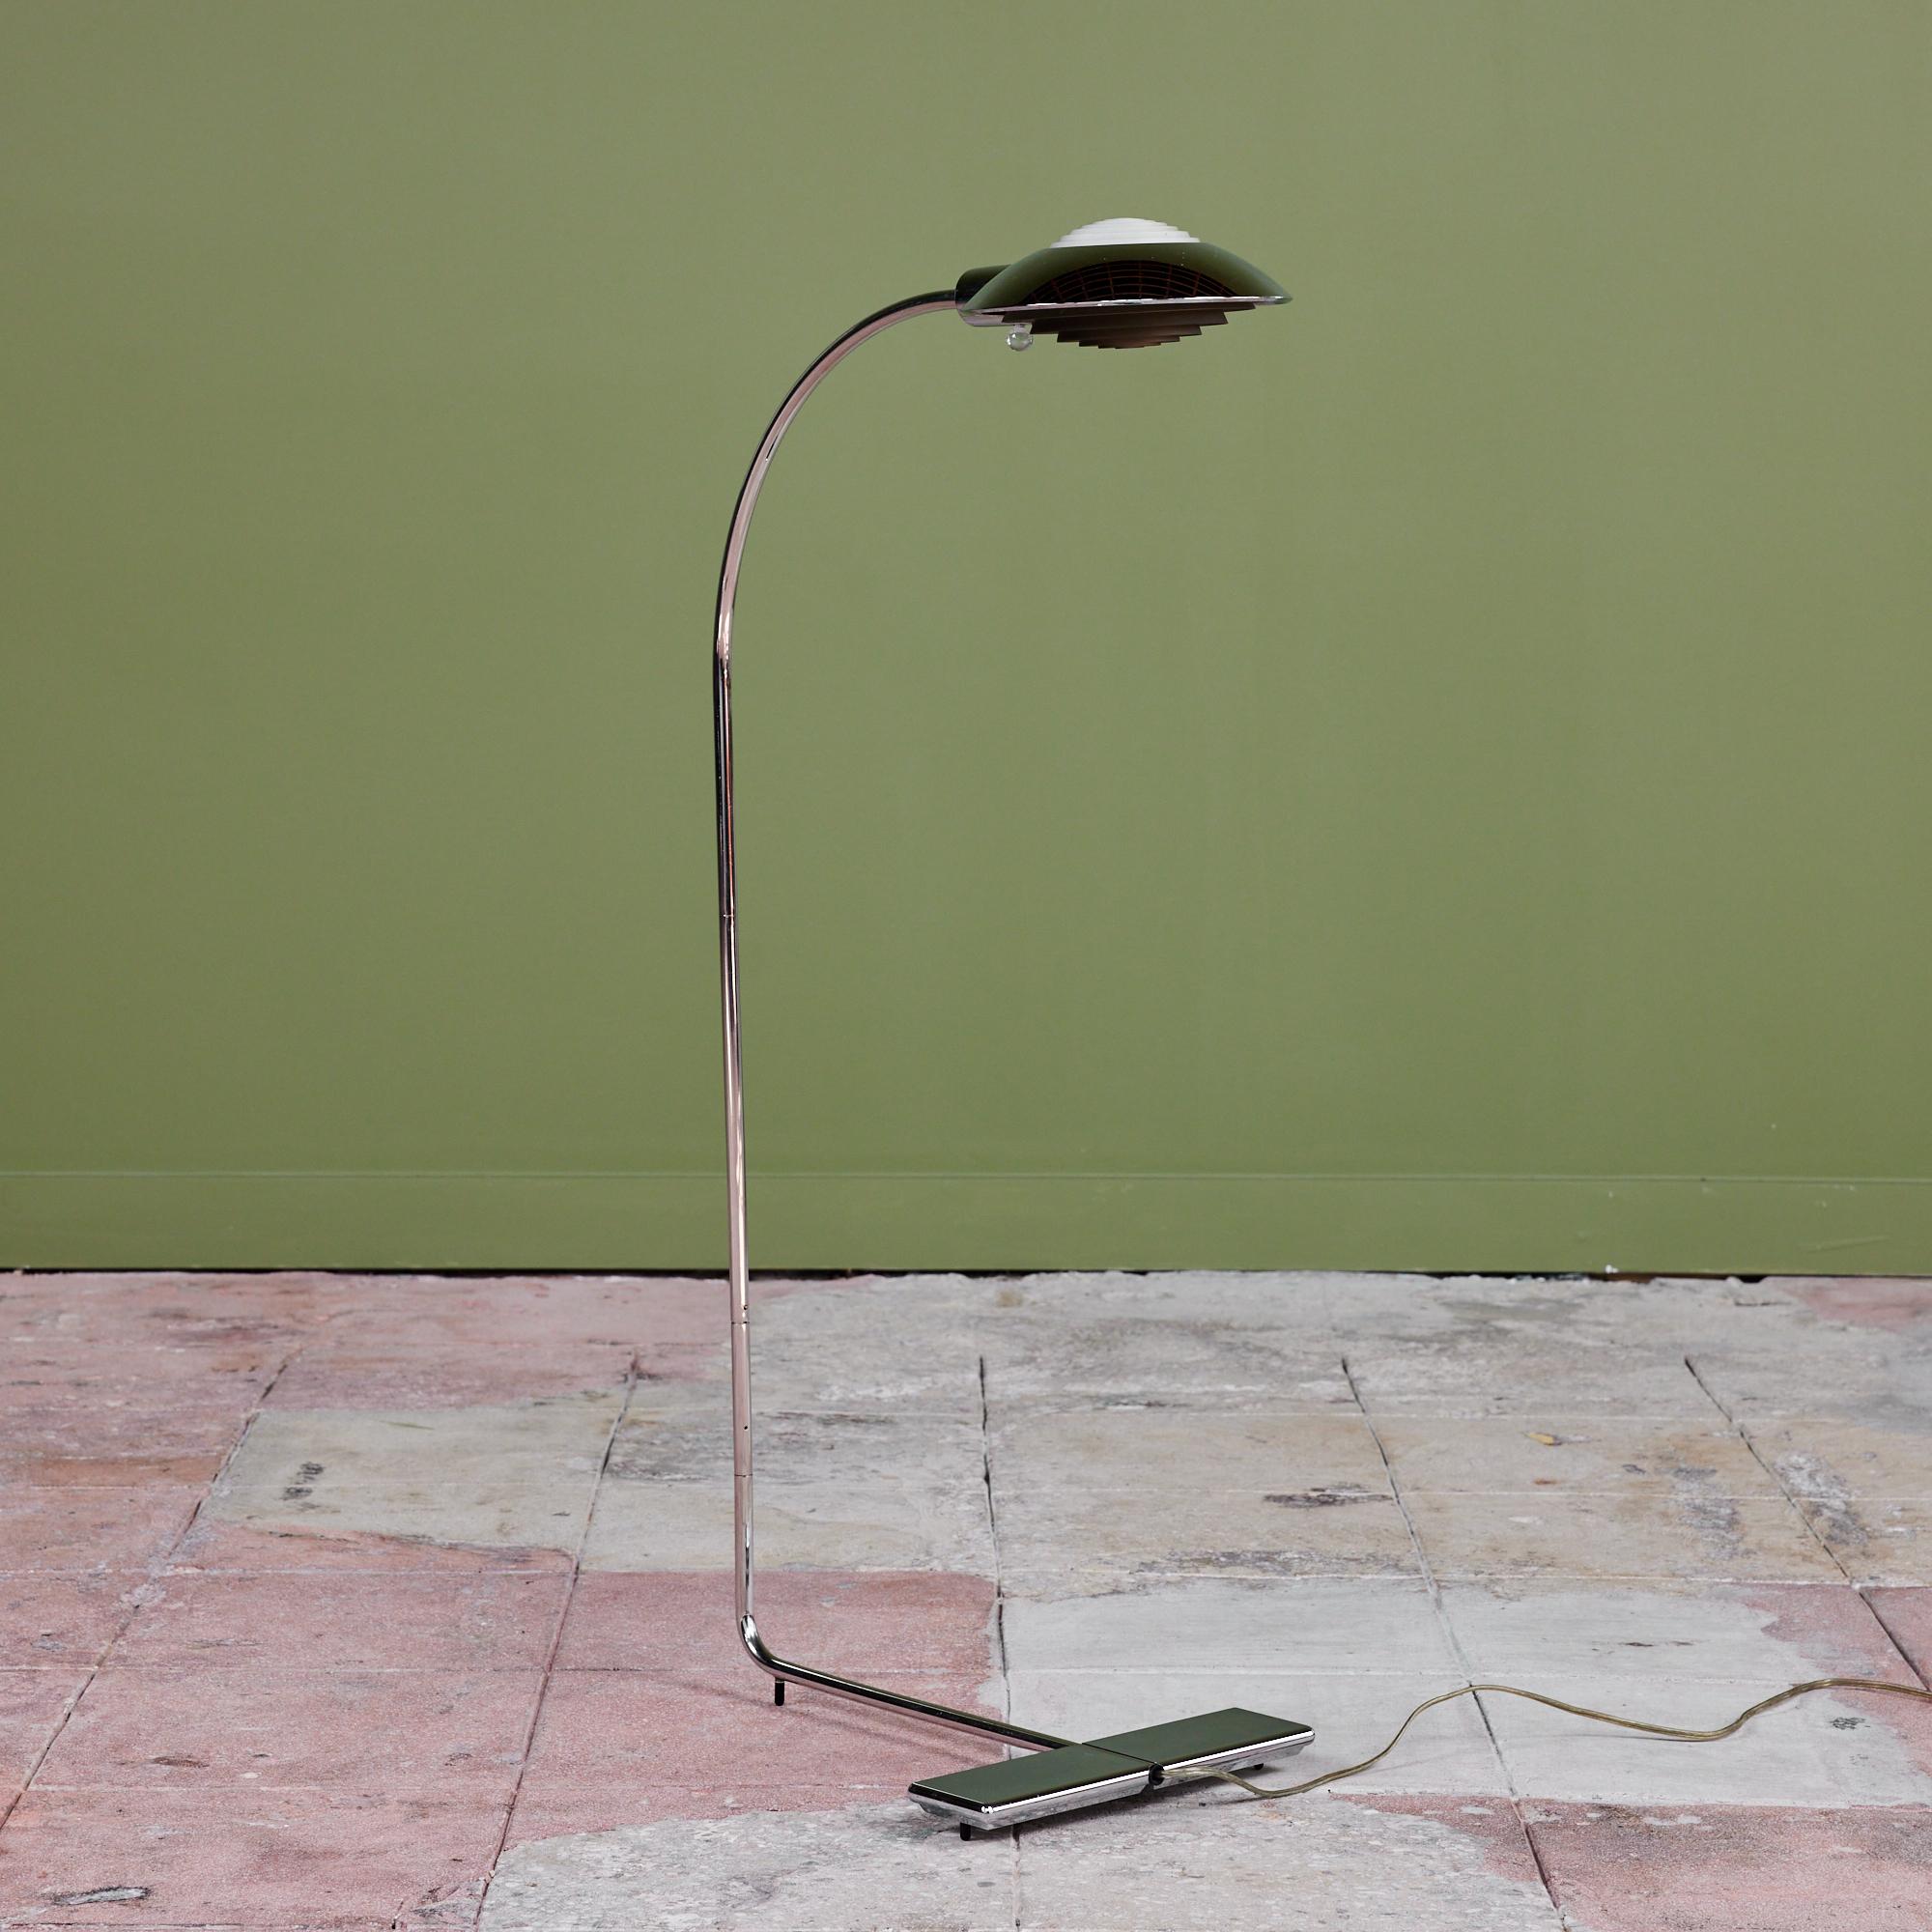 Designed in the 1970s, this chrome floor lamp by Cedric Hartman is an enduring design classic. The modernist floor lamp features a chrome dome shade attached to a curved aluminum stem that offer focused task lighting. The arched pole terminates into